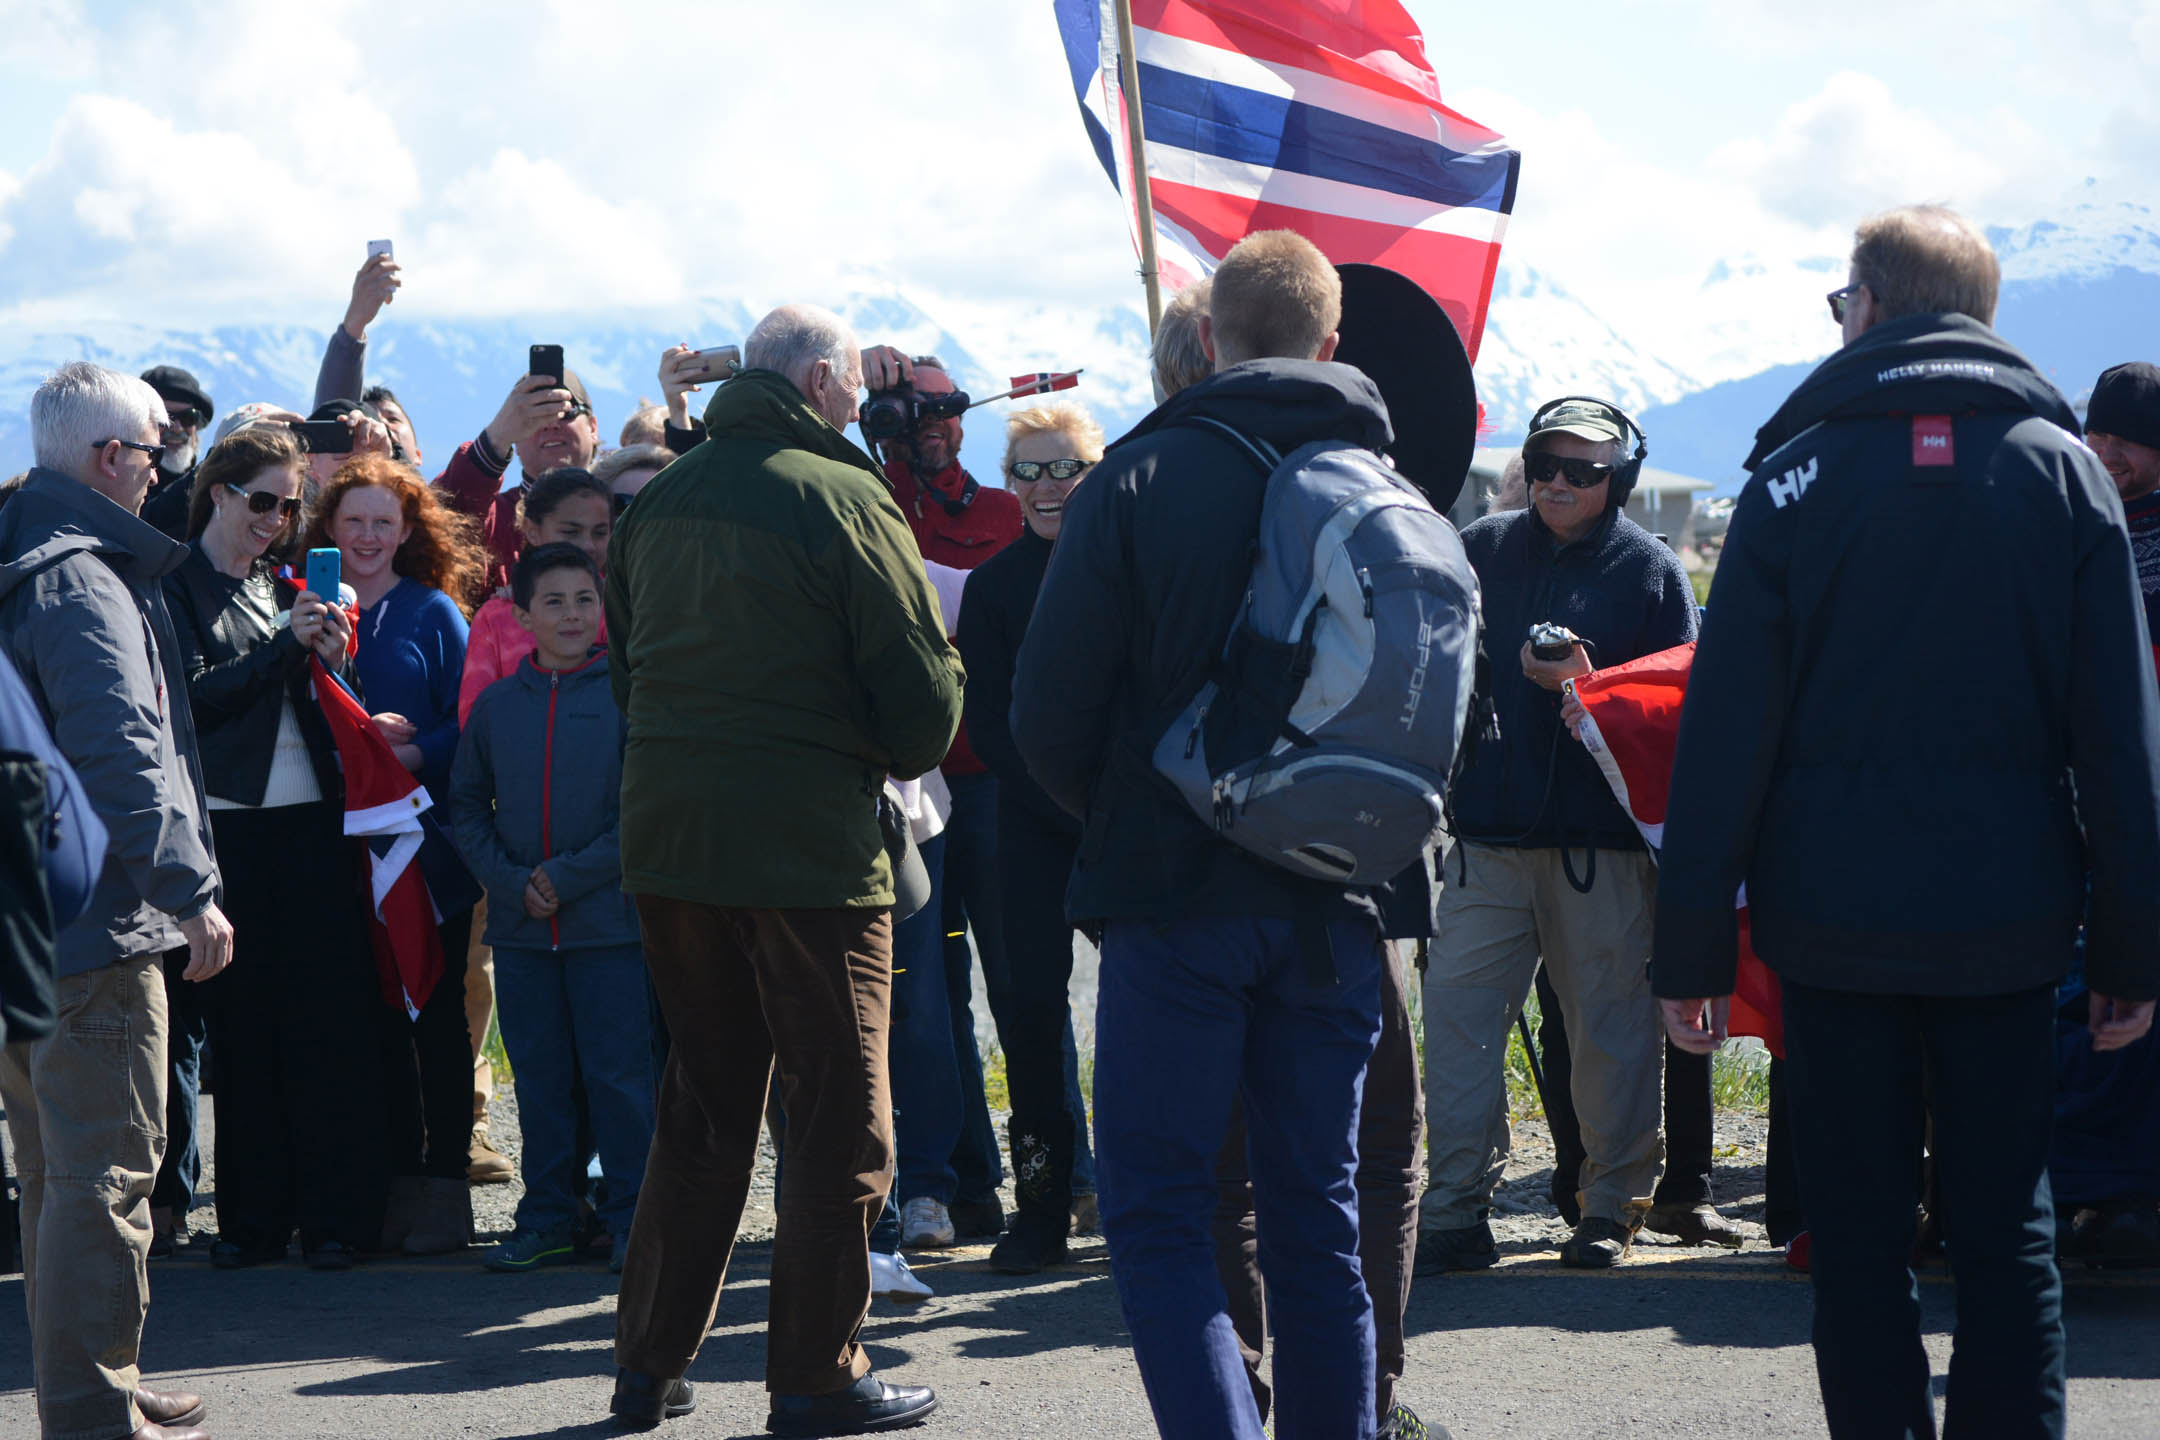 King Harald V, center, in the green jacket greets people as he arrives at the Homer Harbor on Tuesday.-Photo by Michael Armstrong; Homer News